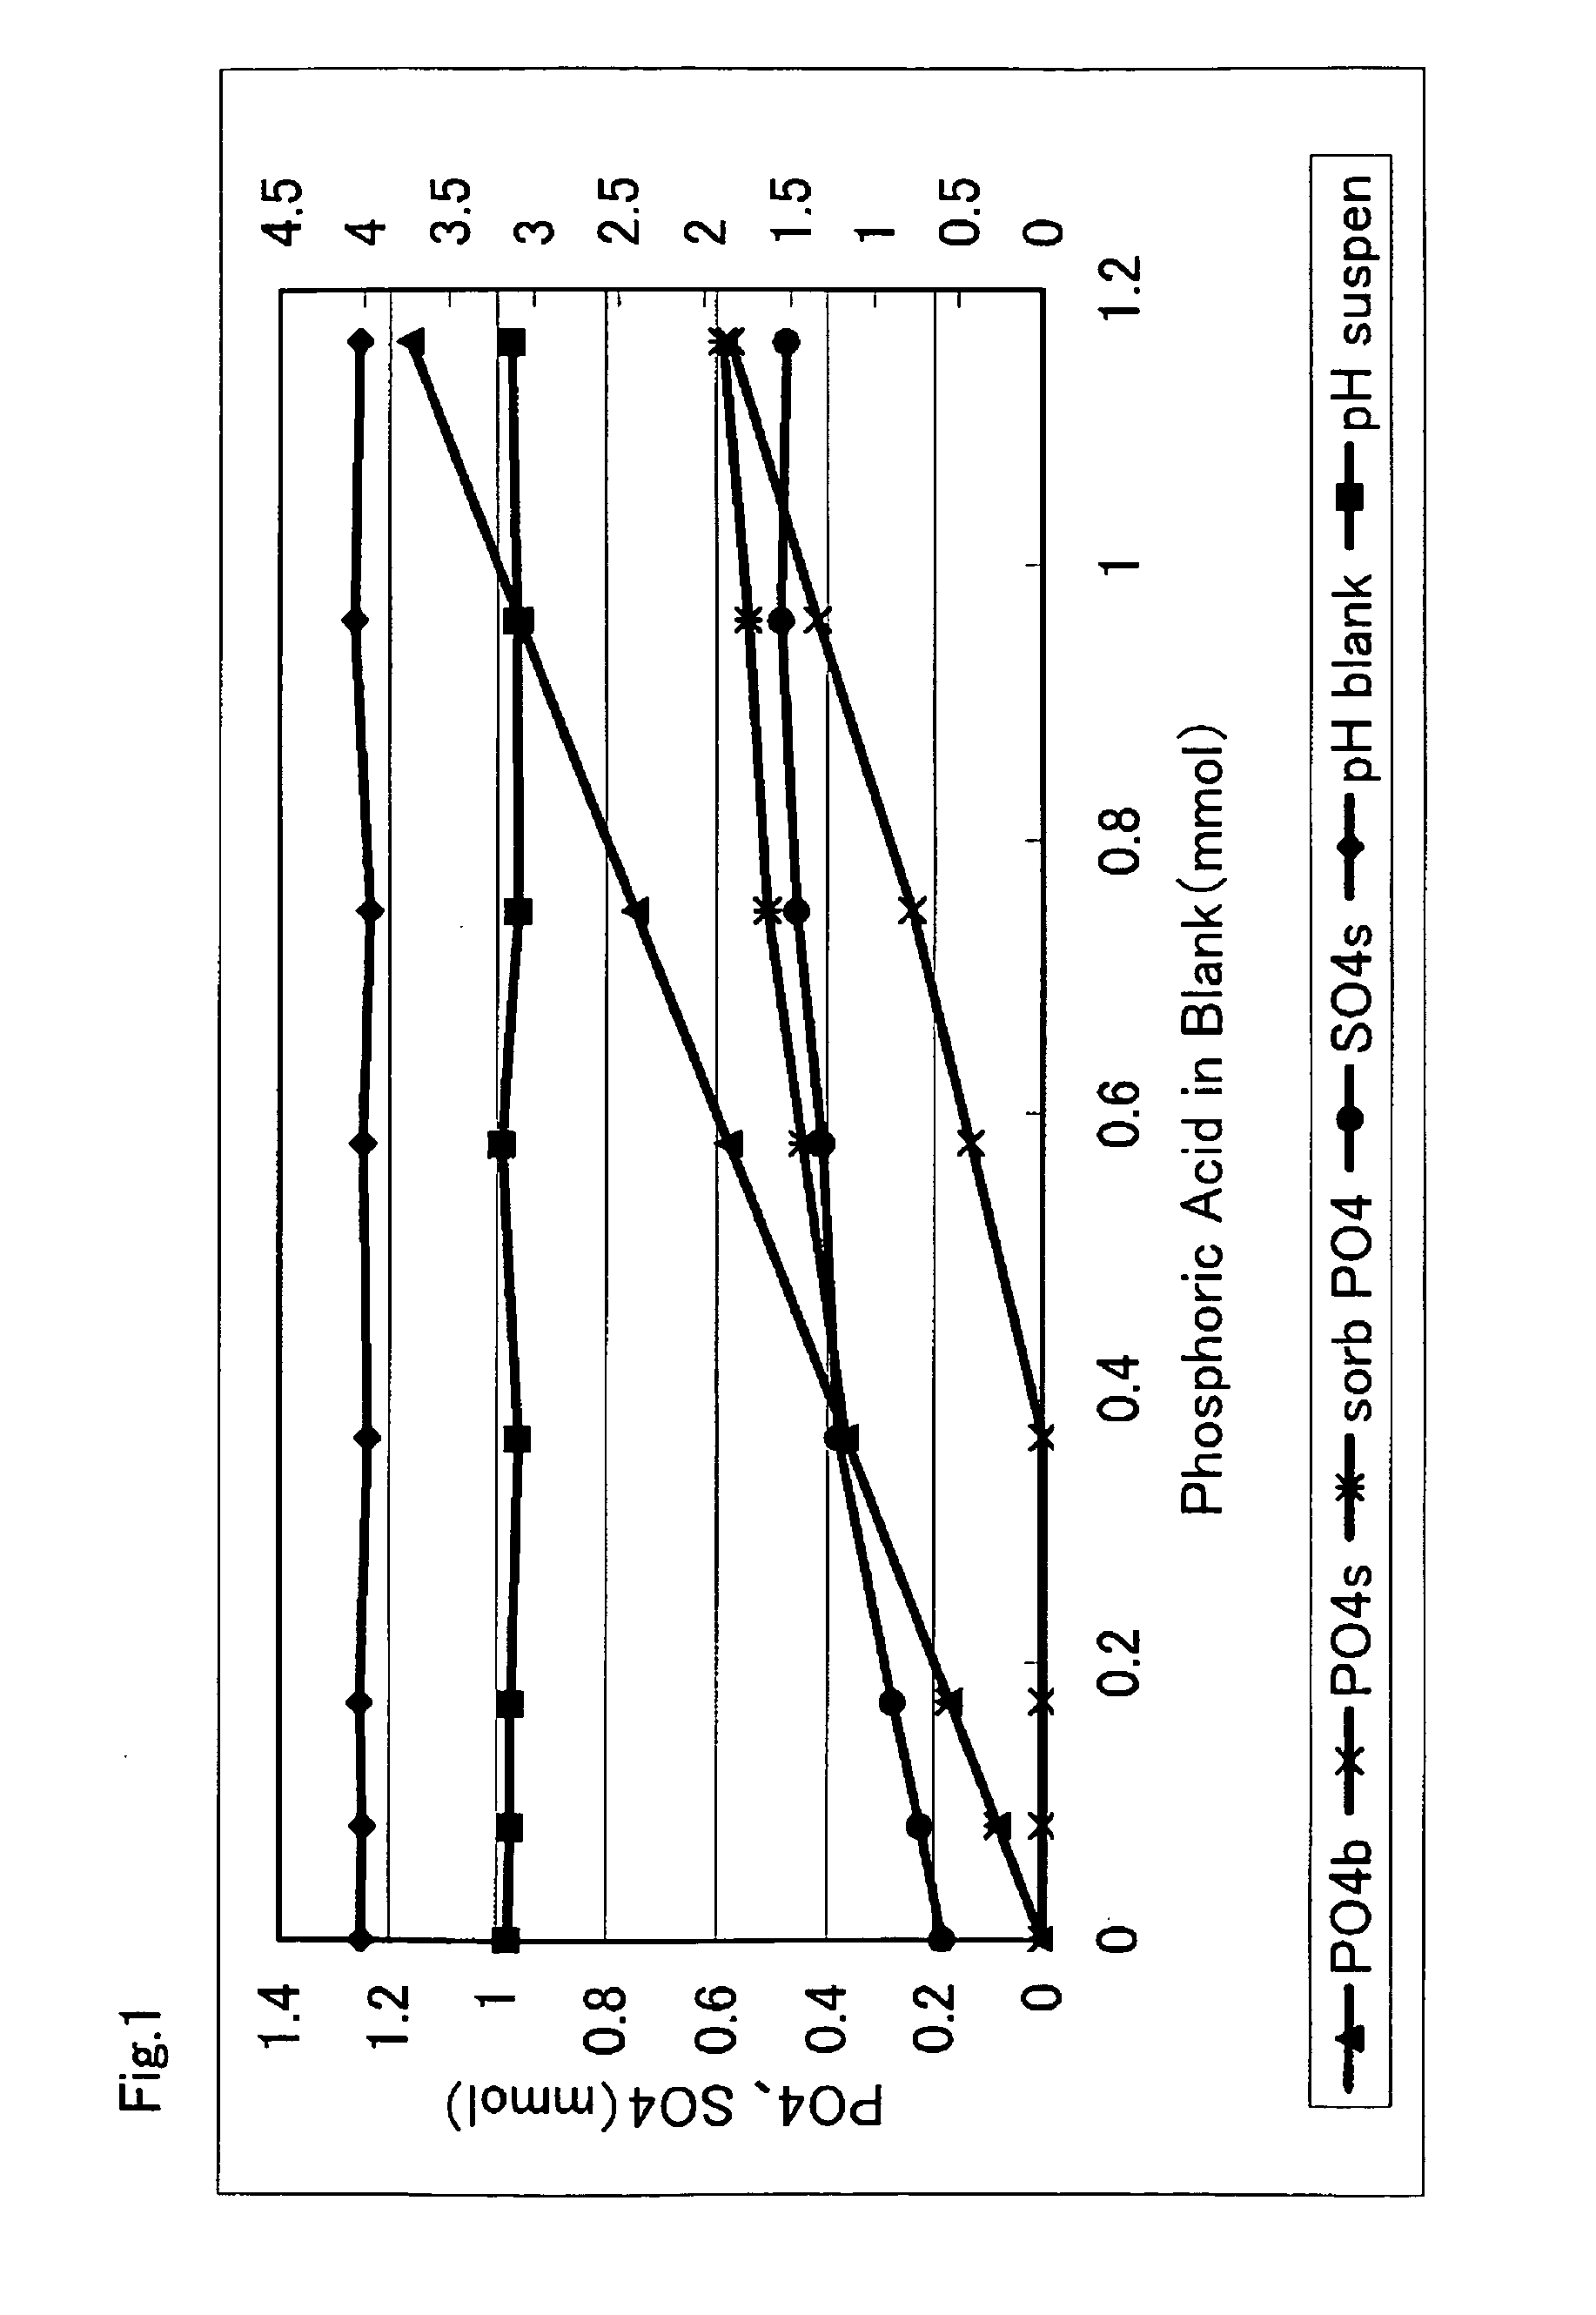 Novel compound, method for stabilizing schwertmannite, method for clarifying polluted water or polluted soil, and method for absorbing phosphoric acid